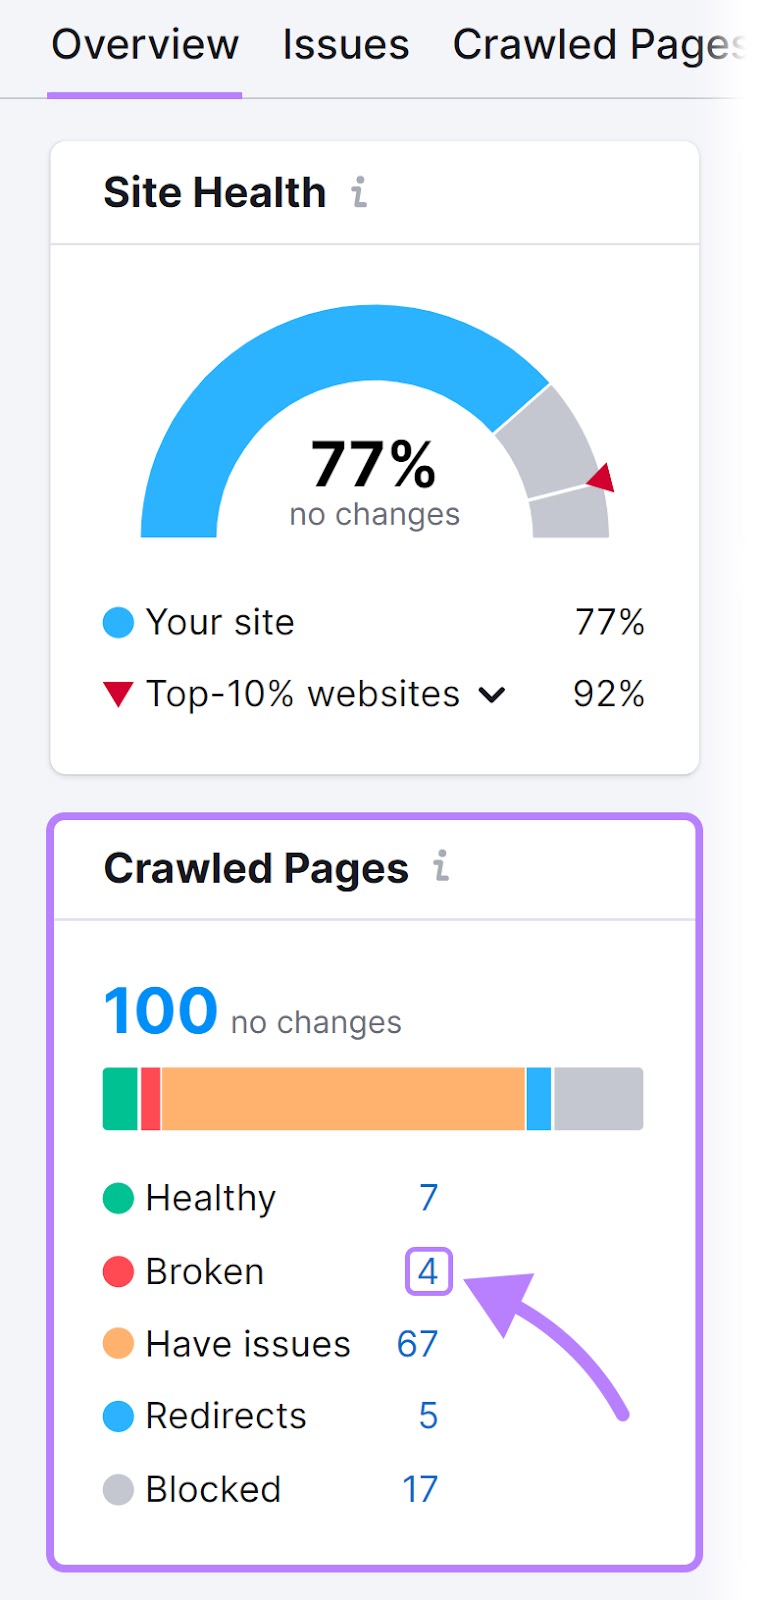 “Crawled Pages” section under the “Overview” report in Site Audit